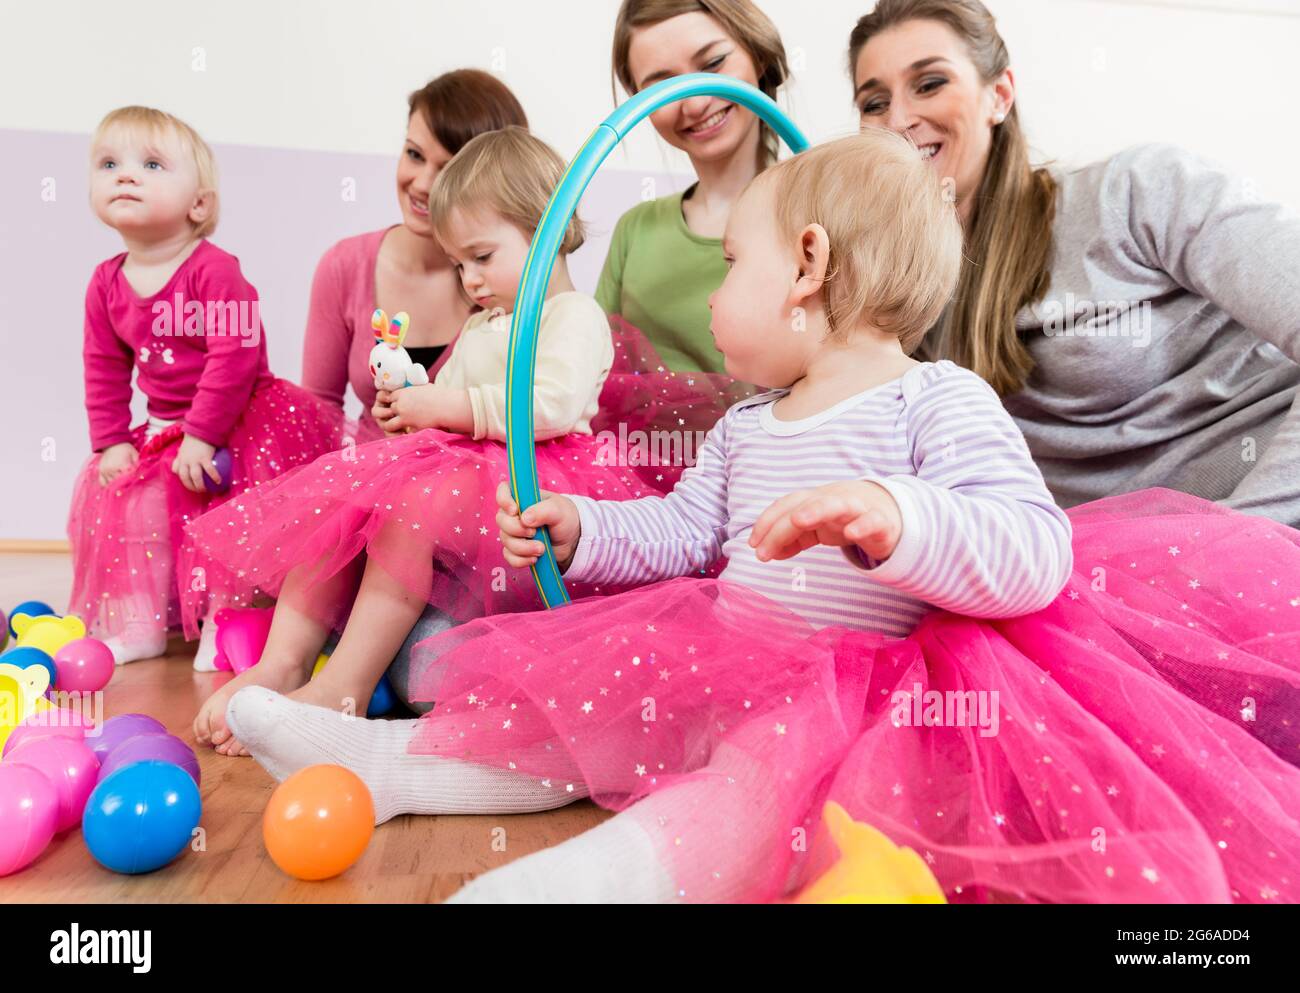 Toddler in pink dress playing with hula hoop Stock Photo